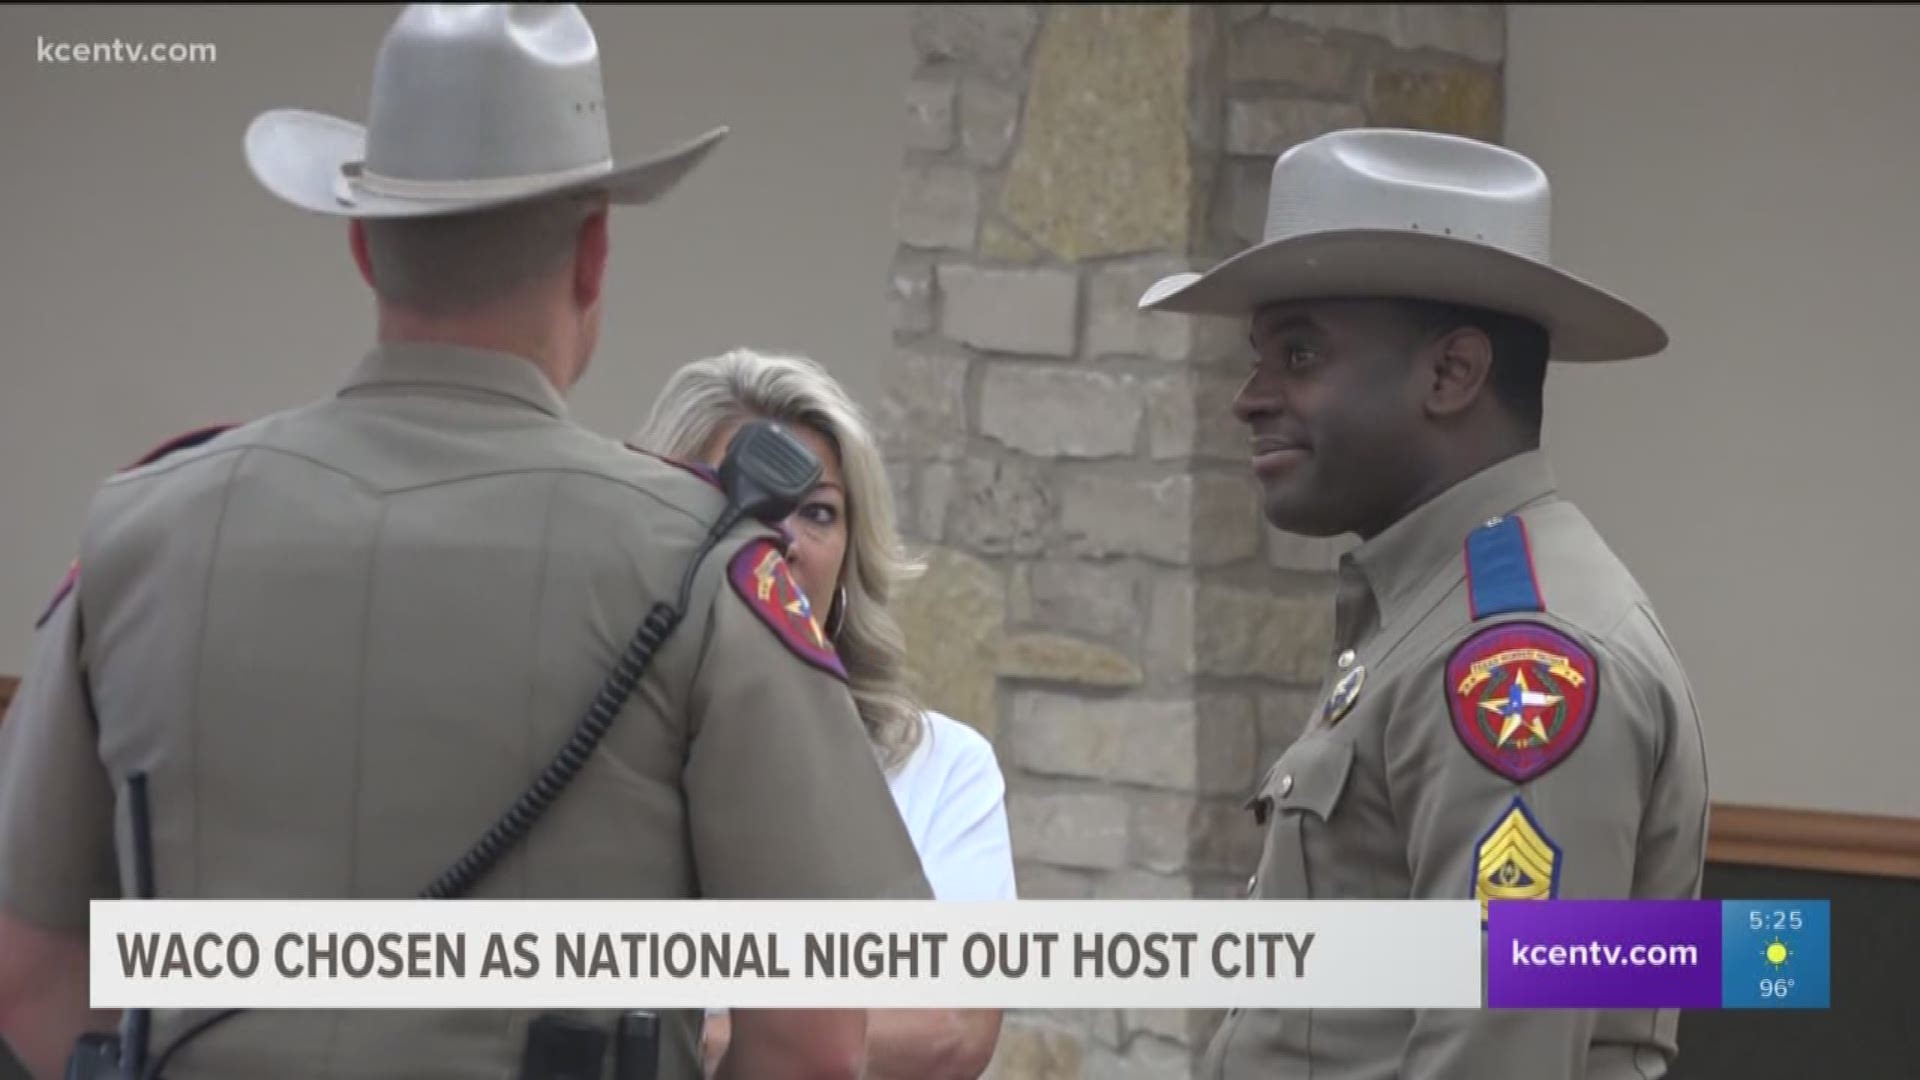 Waco was chosen as the host city for the announcement for the National Night Out activities.